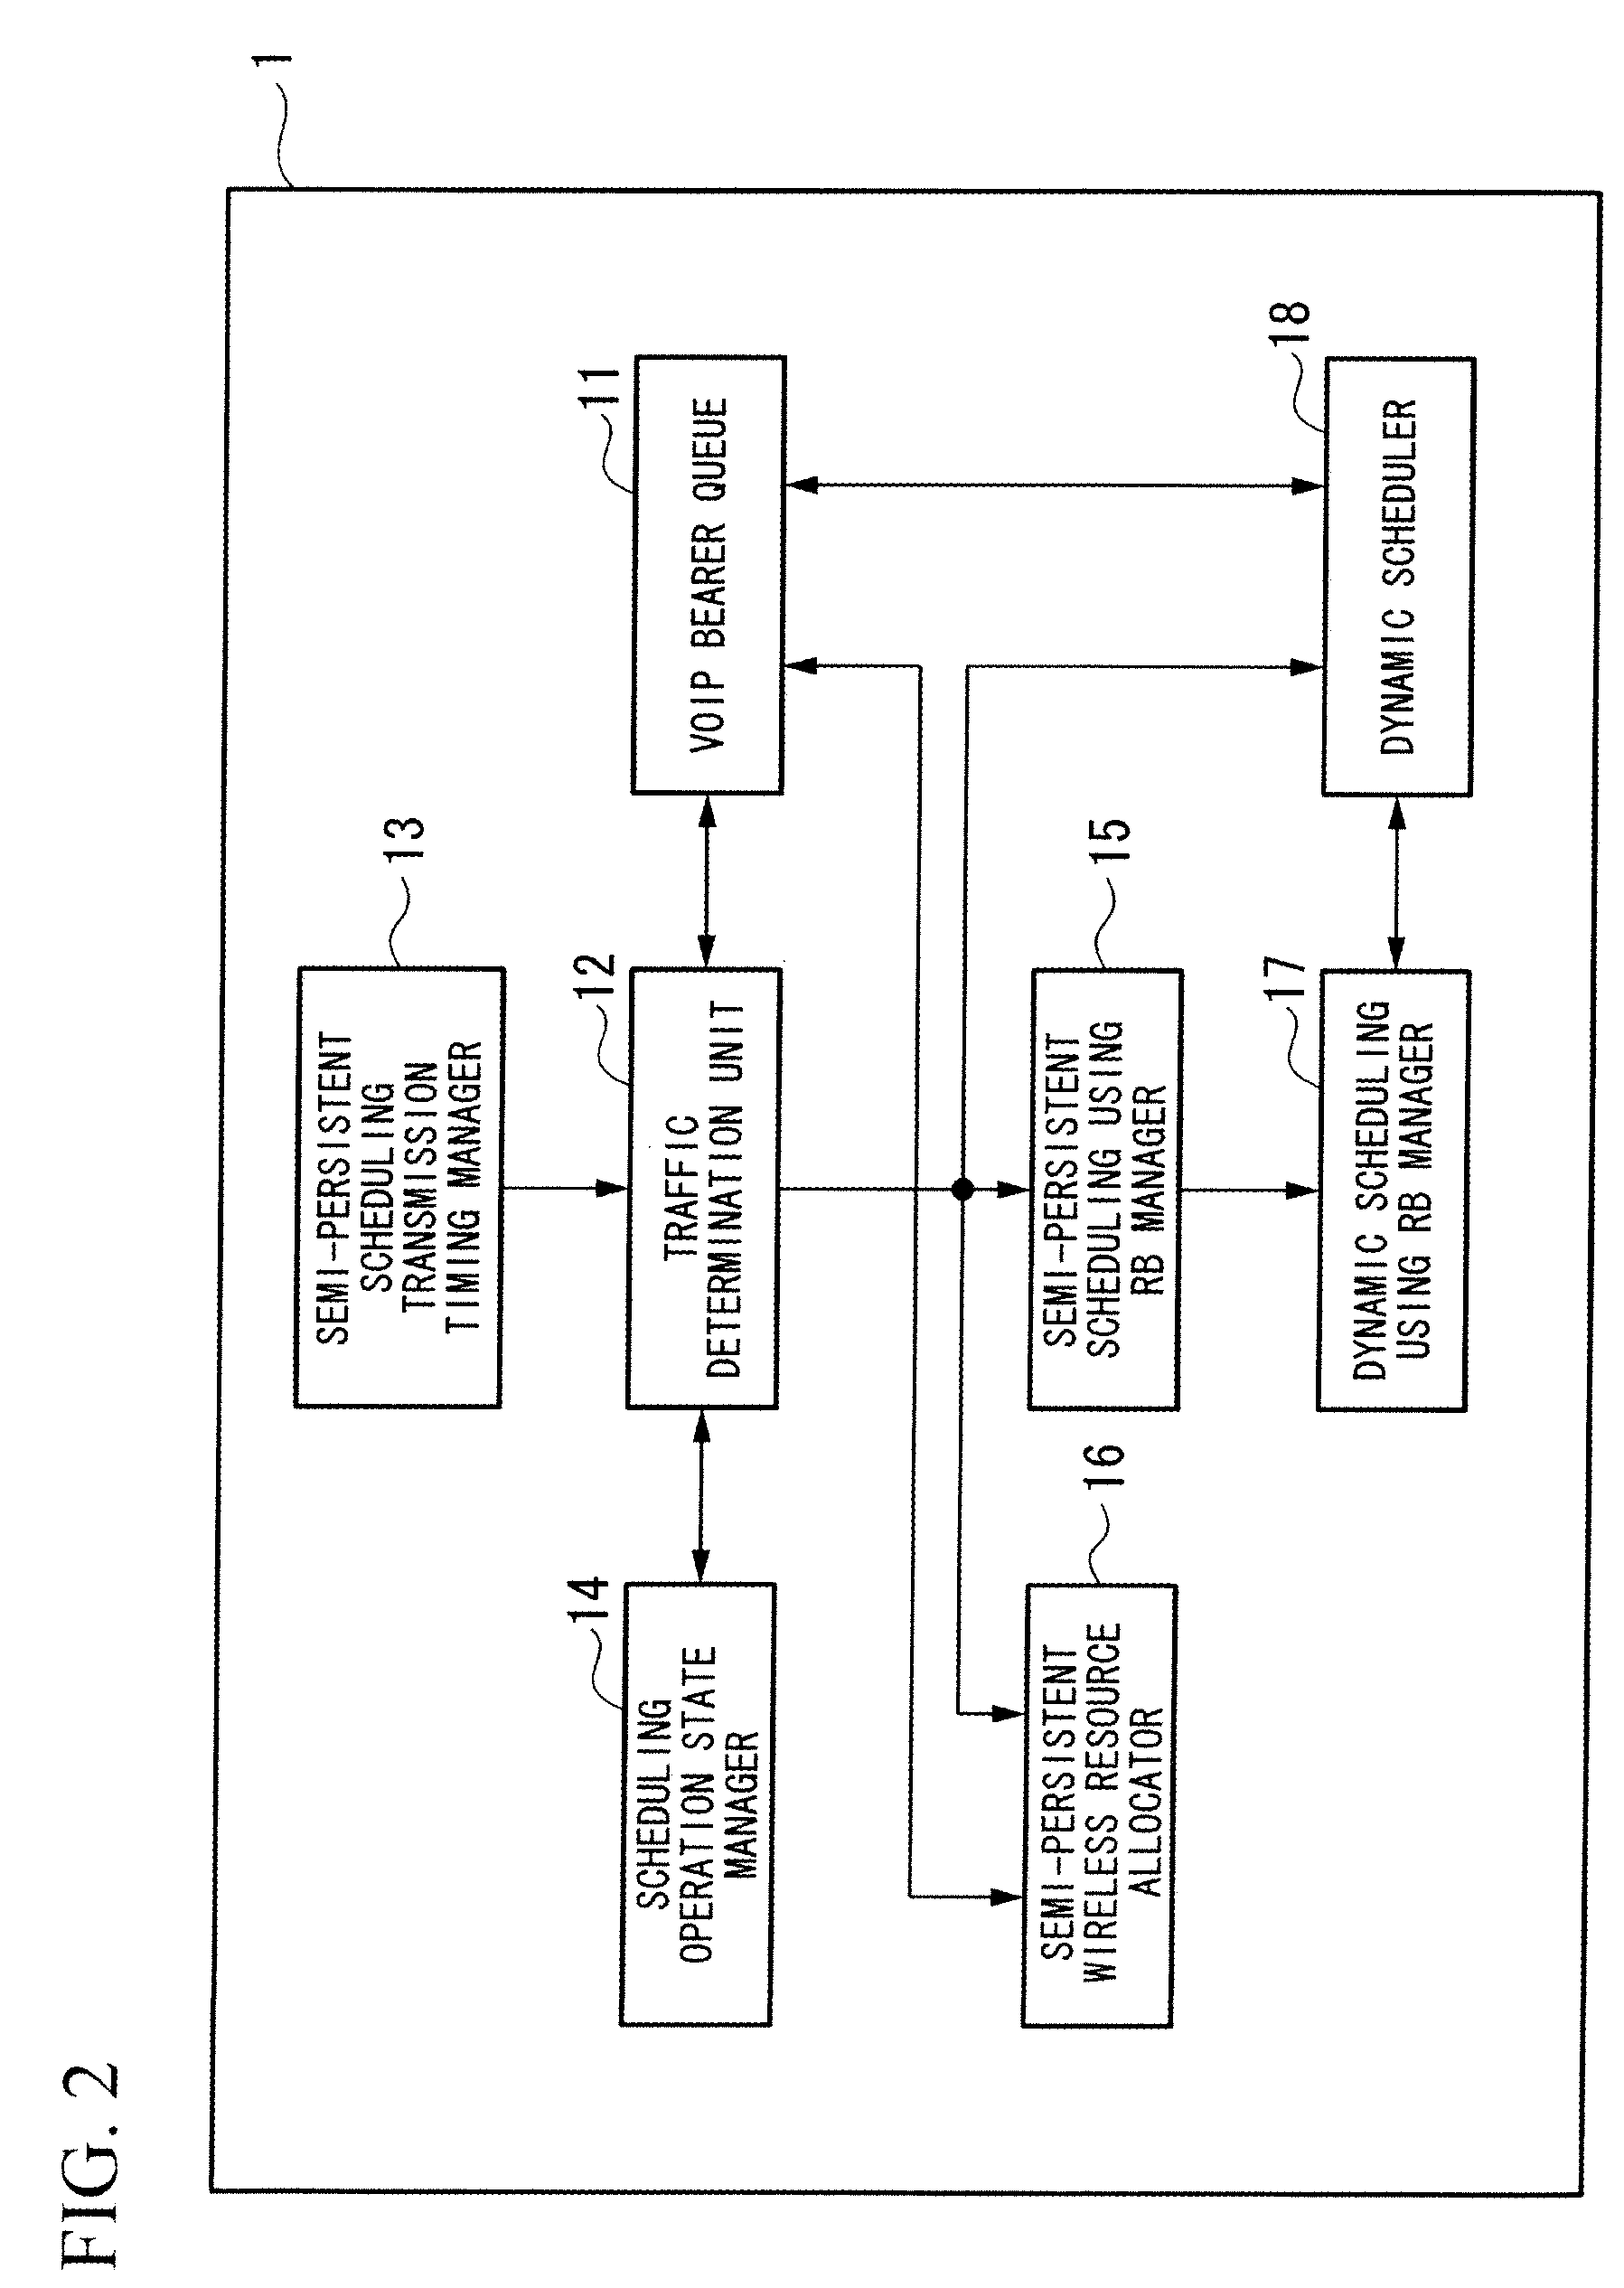 Wireless resource allocation apparatus and method